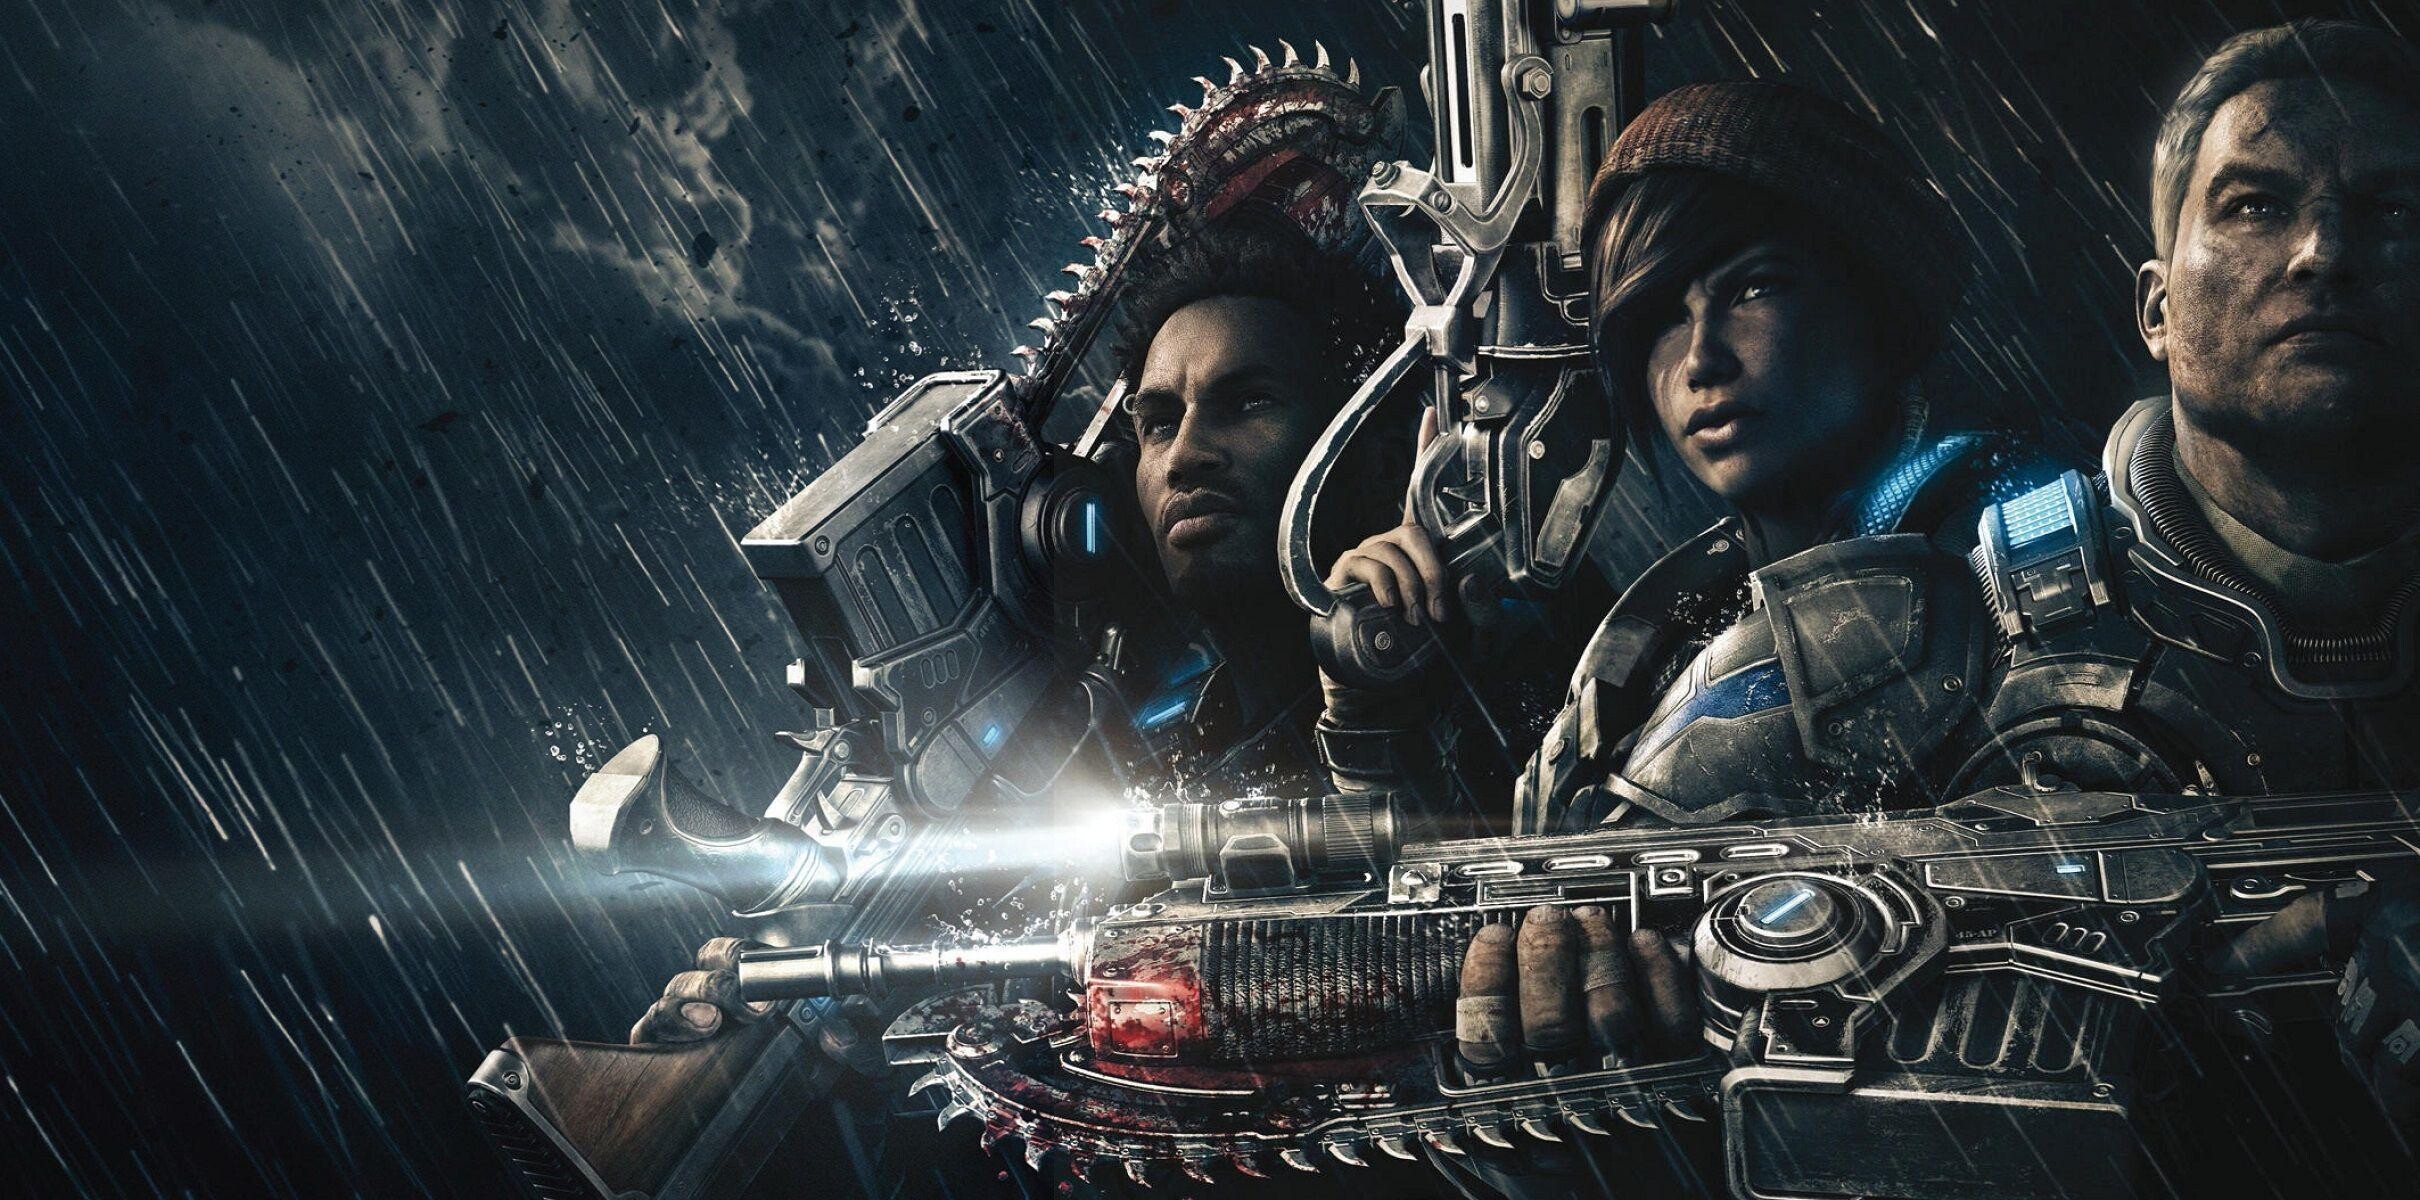 Gears 4 wallpapers, Striking backgrounds, High-quality visuals, Action-packed gameplay, 2420x1200 Dual Screen Desktop